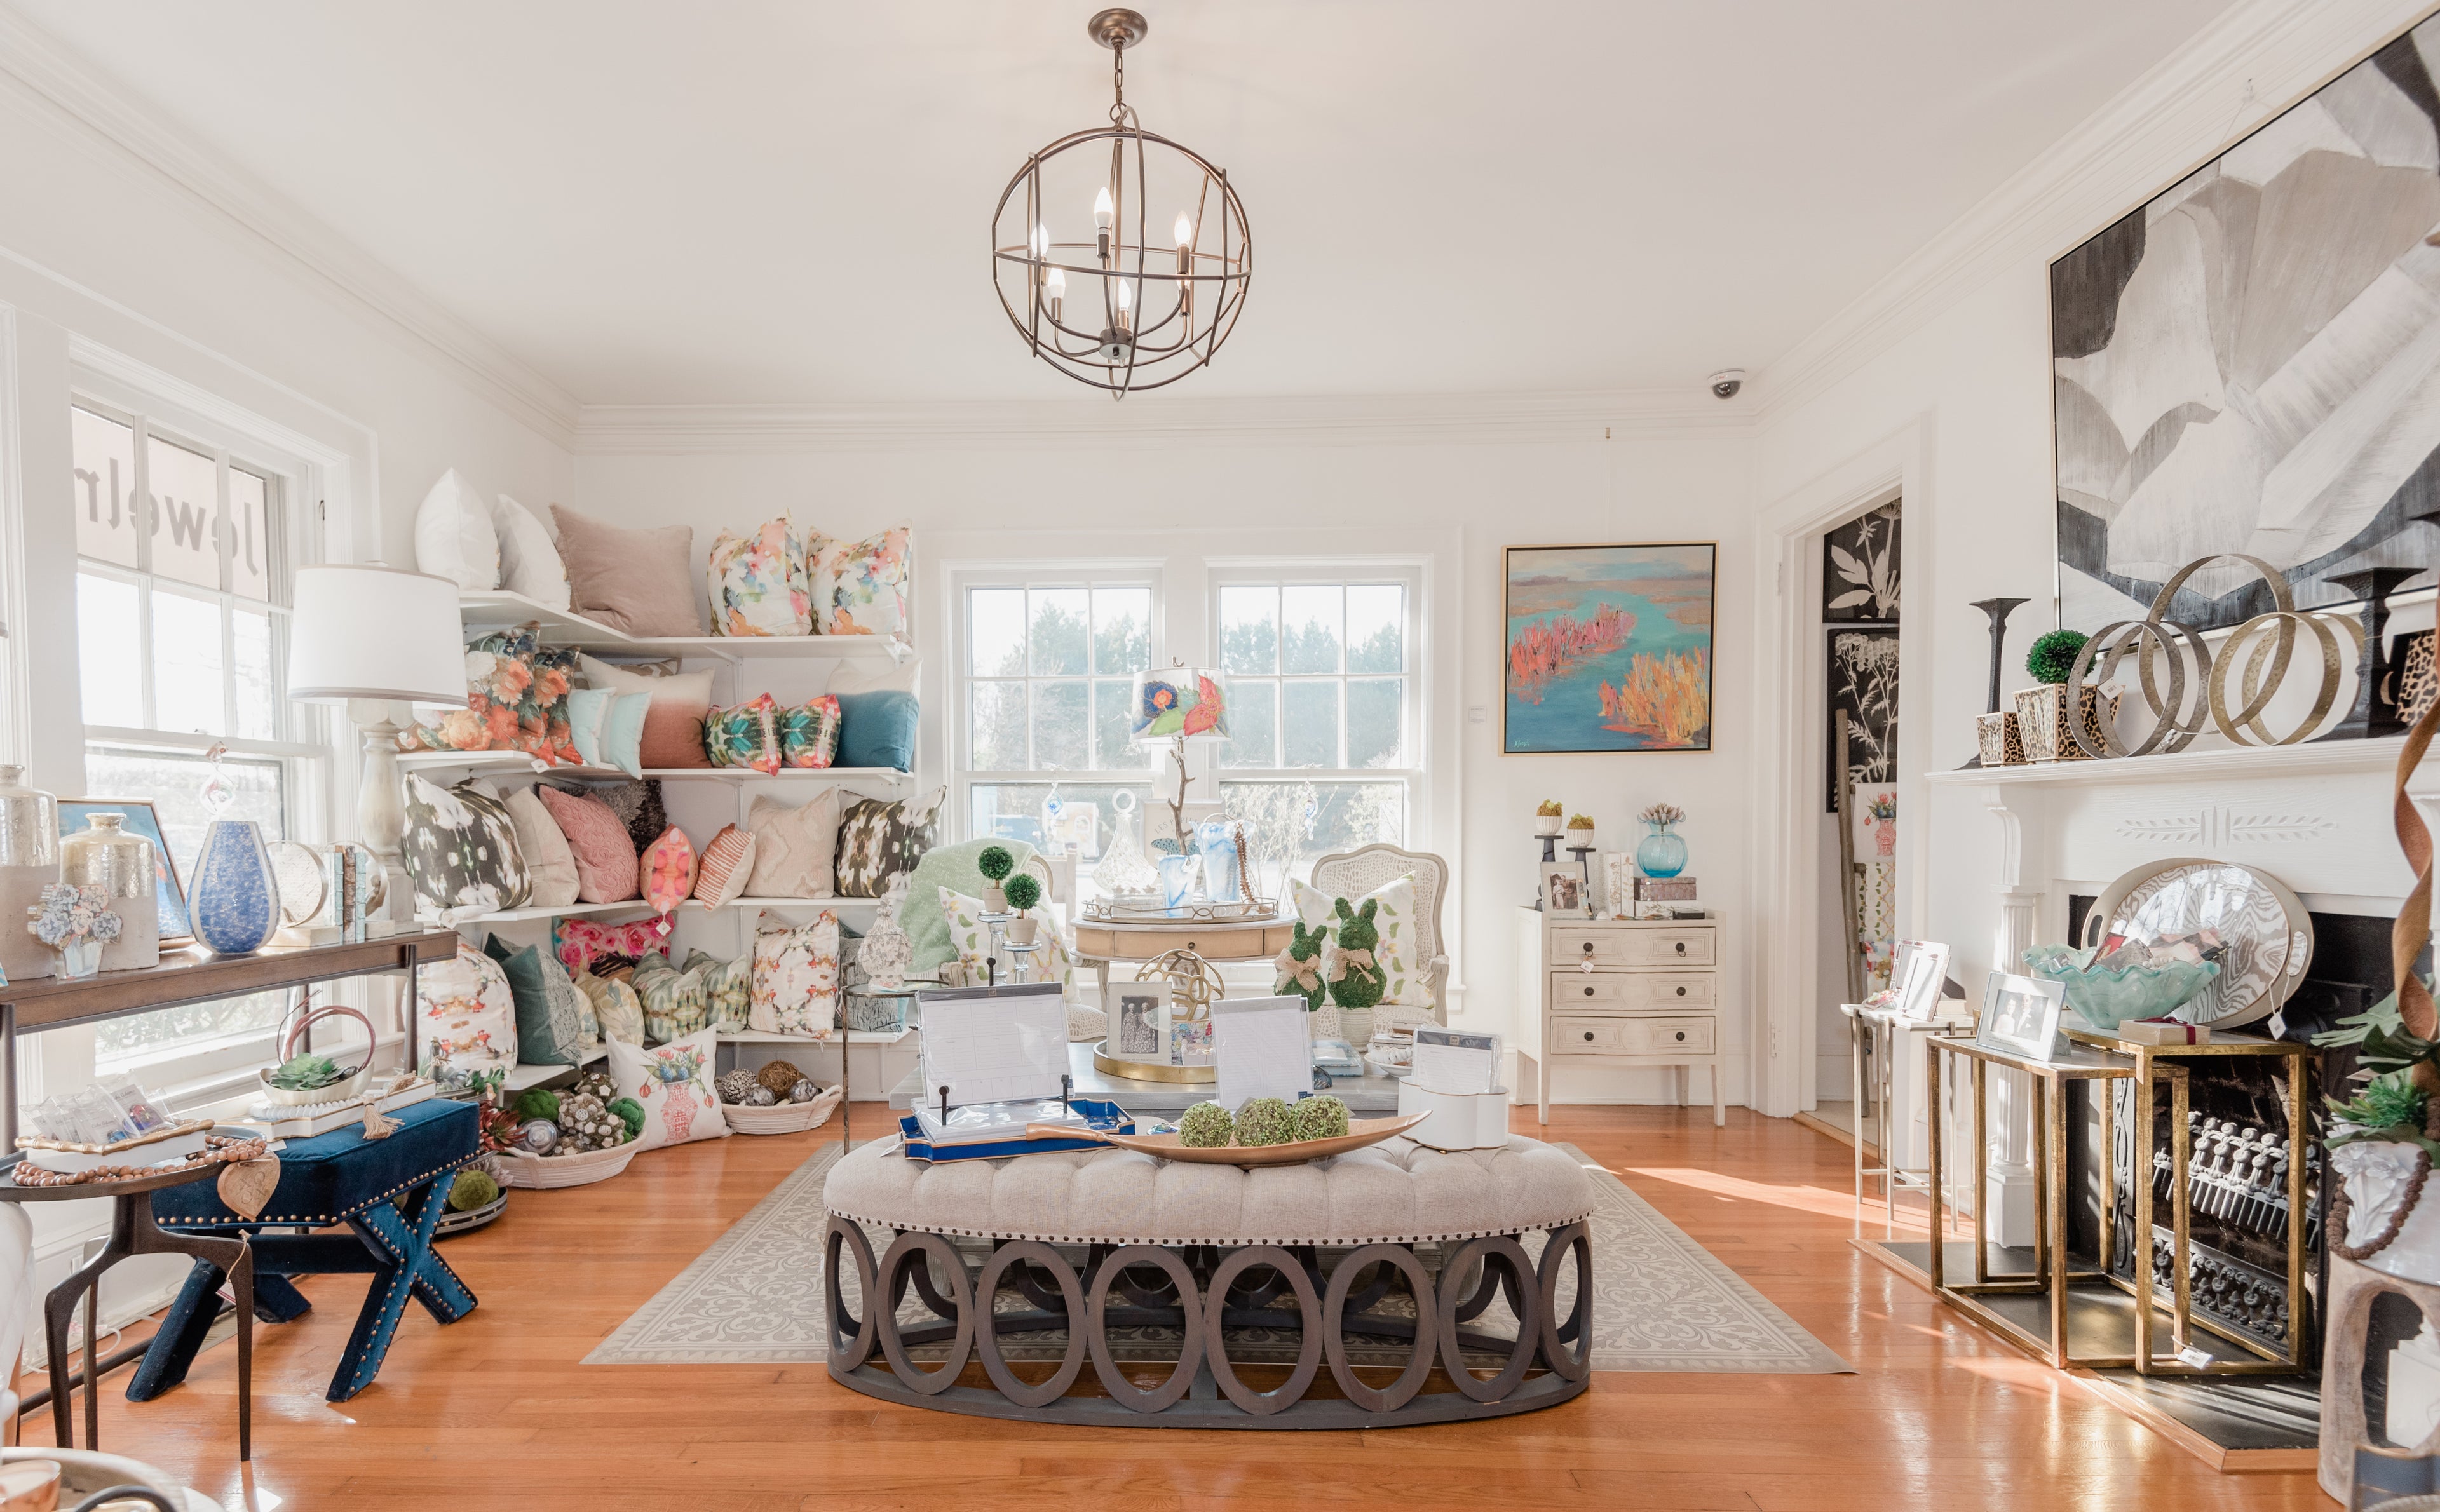 Photo of the inside of Home, Hear & Soul, a home décor and gift shop located in Cornelius, North Carolina. The photo features artwork, pillows, and home accessories